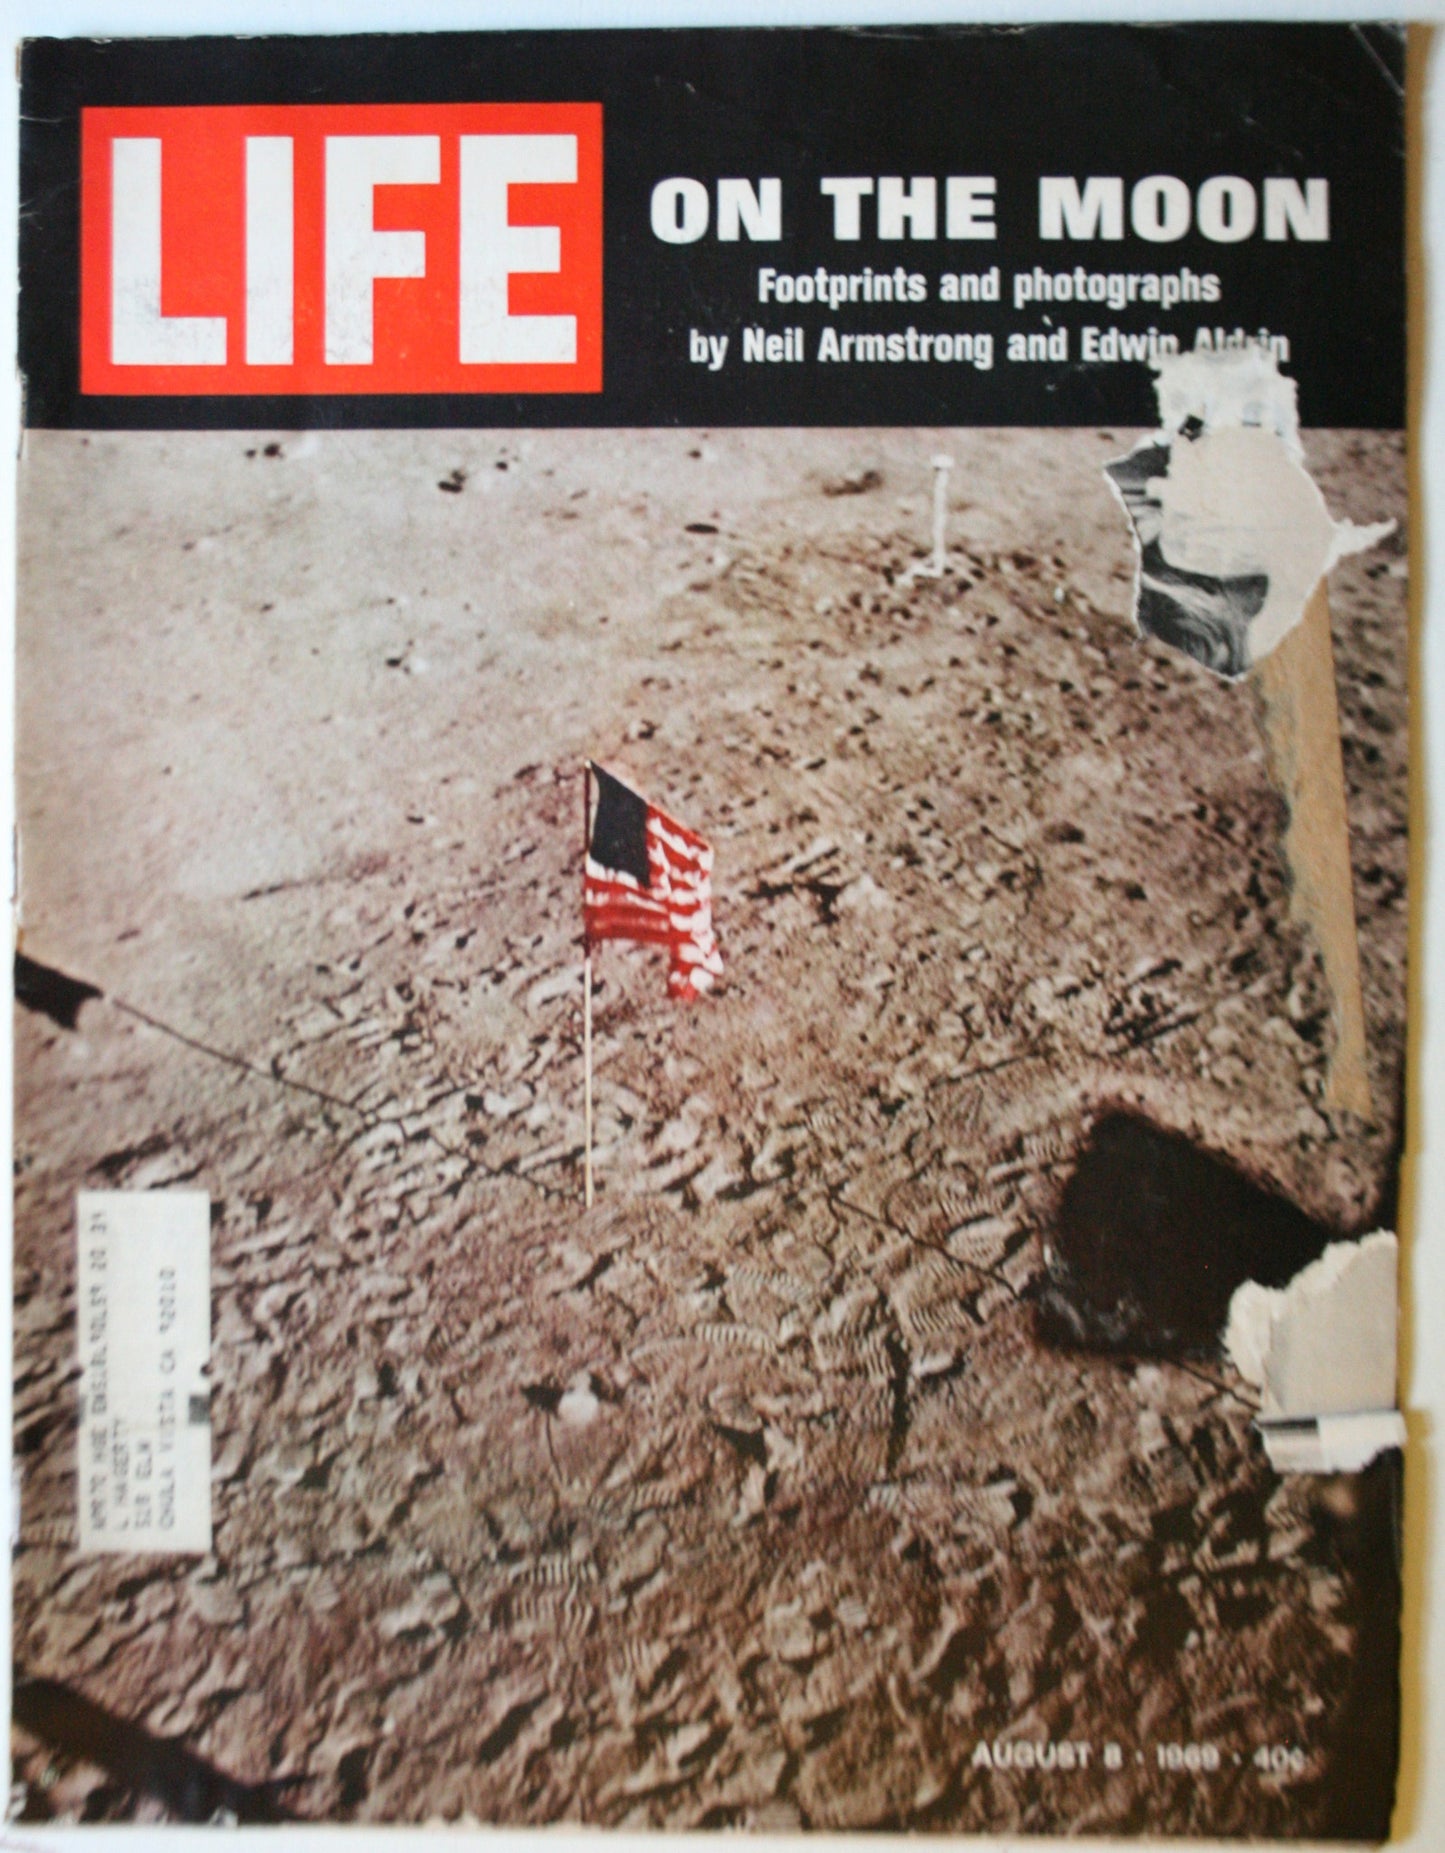 08 08 1969 LIFE On The Moon